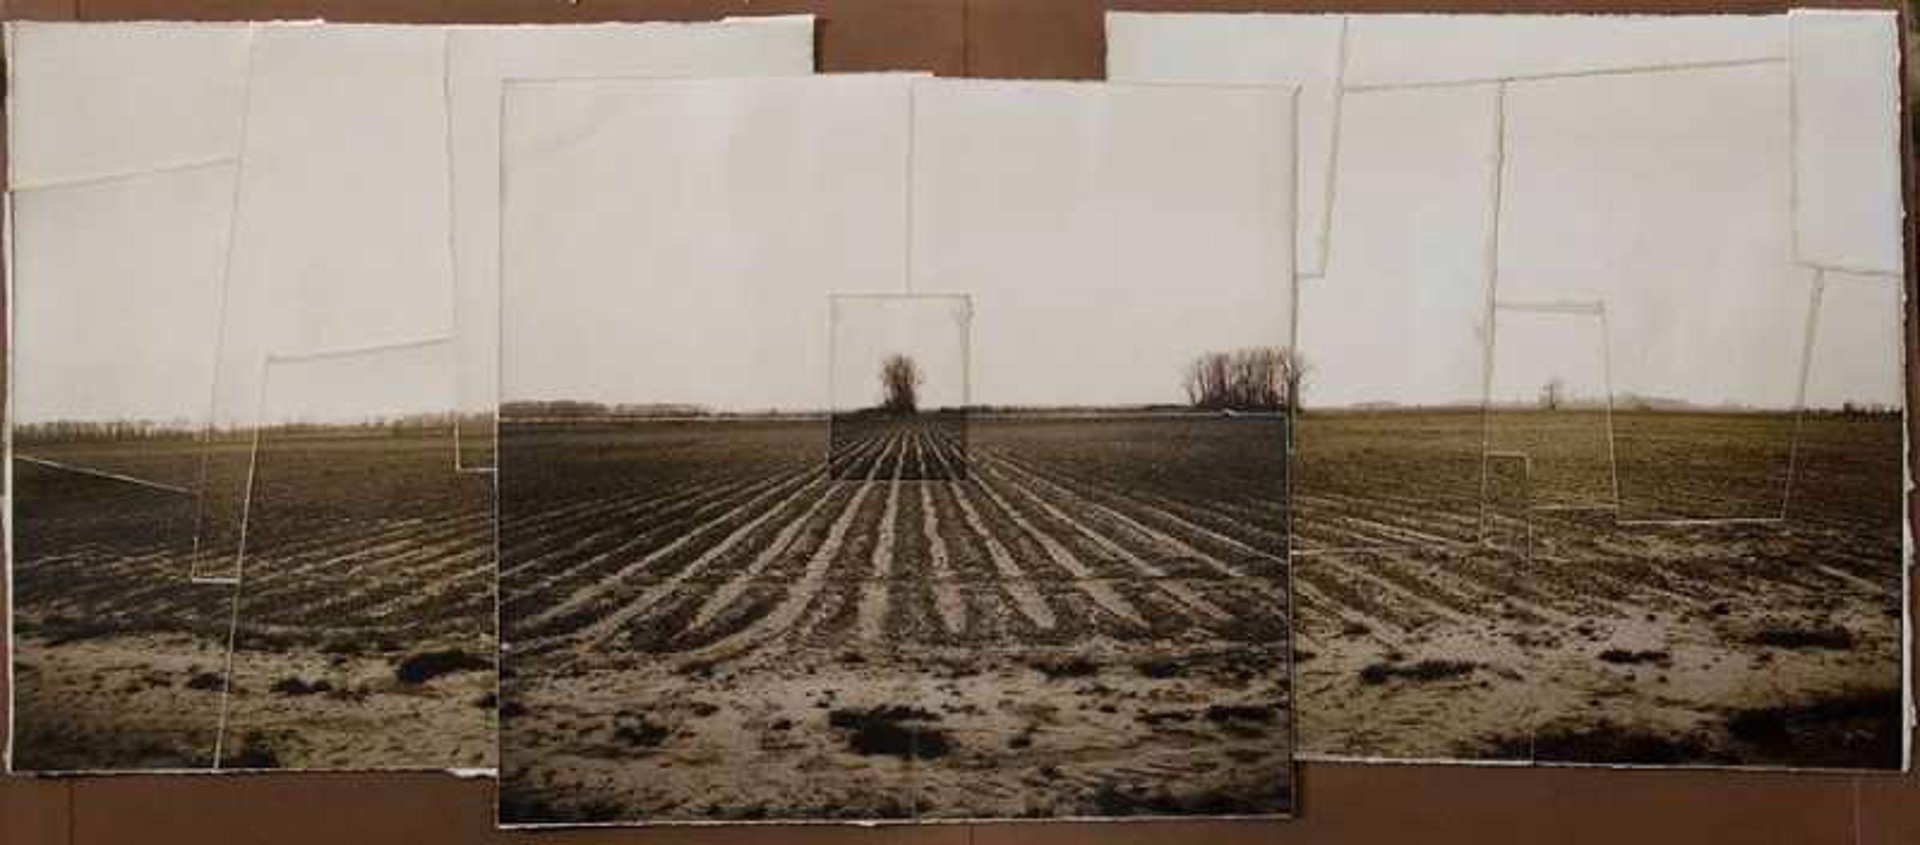 Field Rows by George Yerger